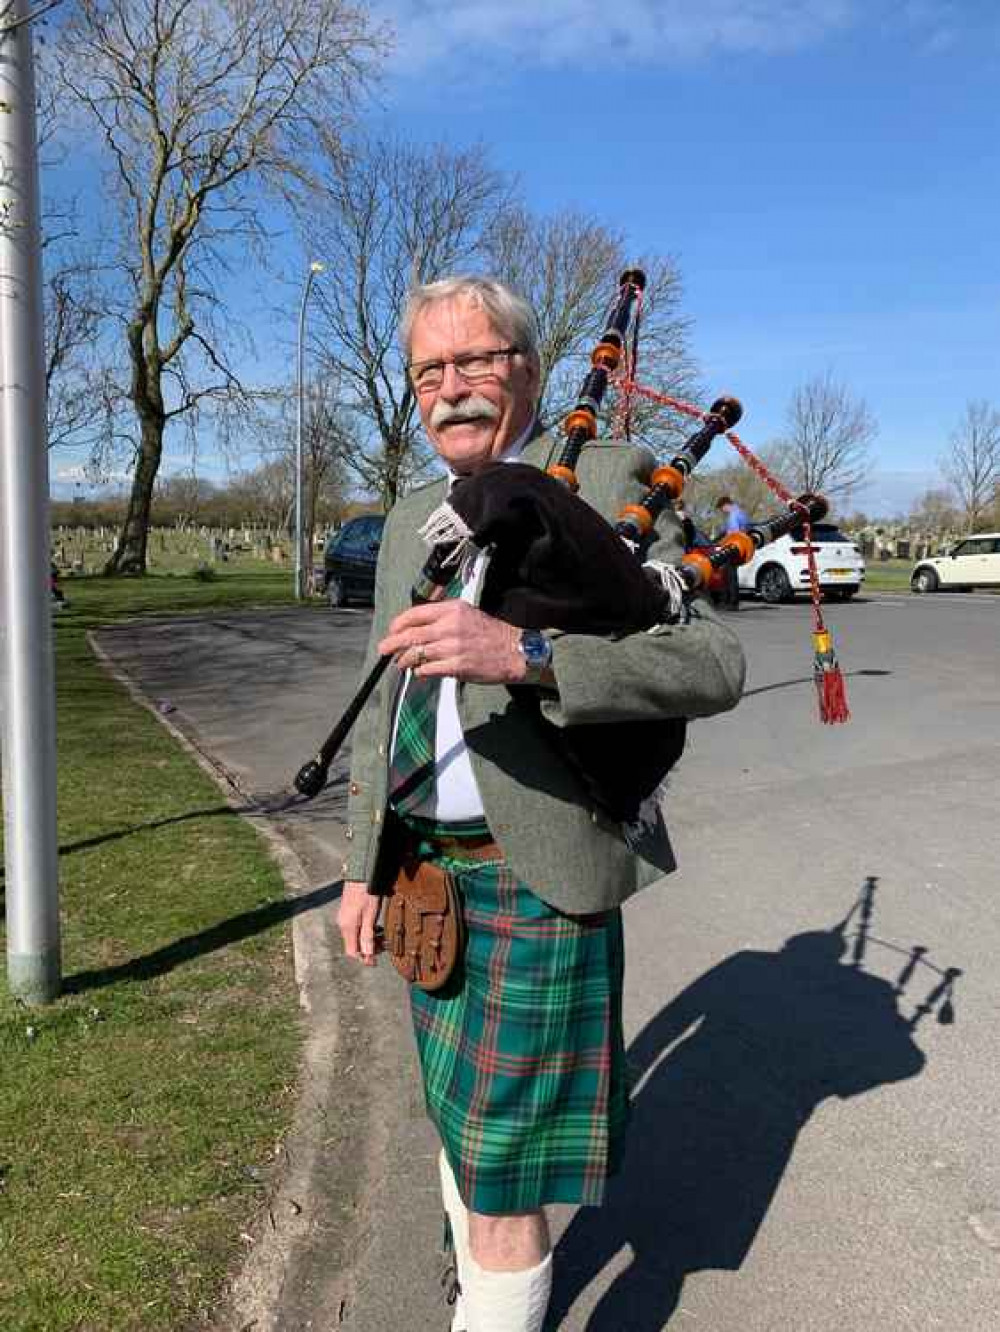 Scottish Bagpiper for Hire- Malcolm Smith- North West England